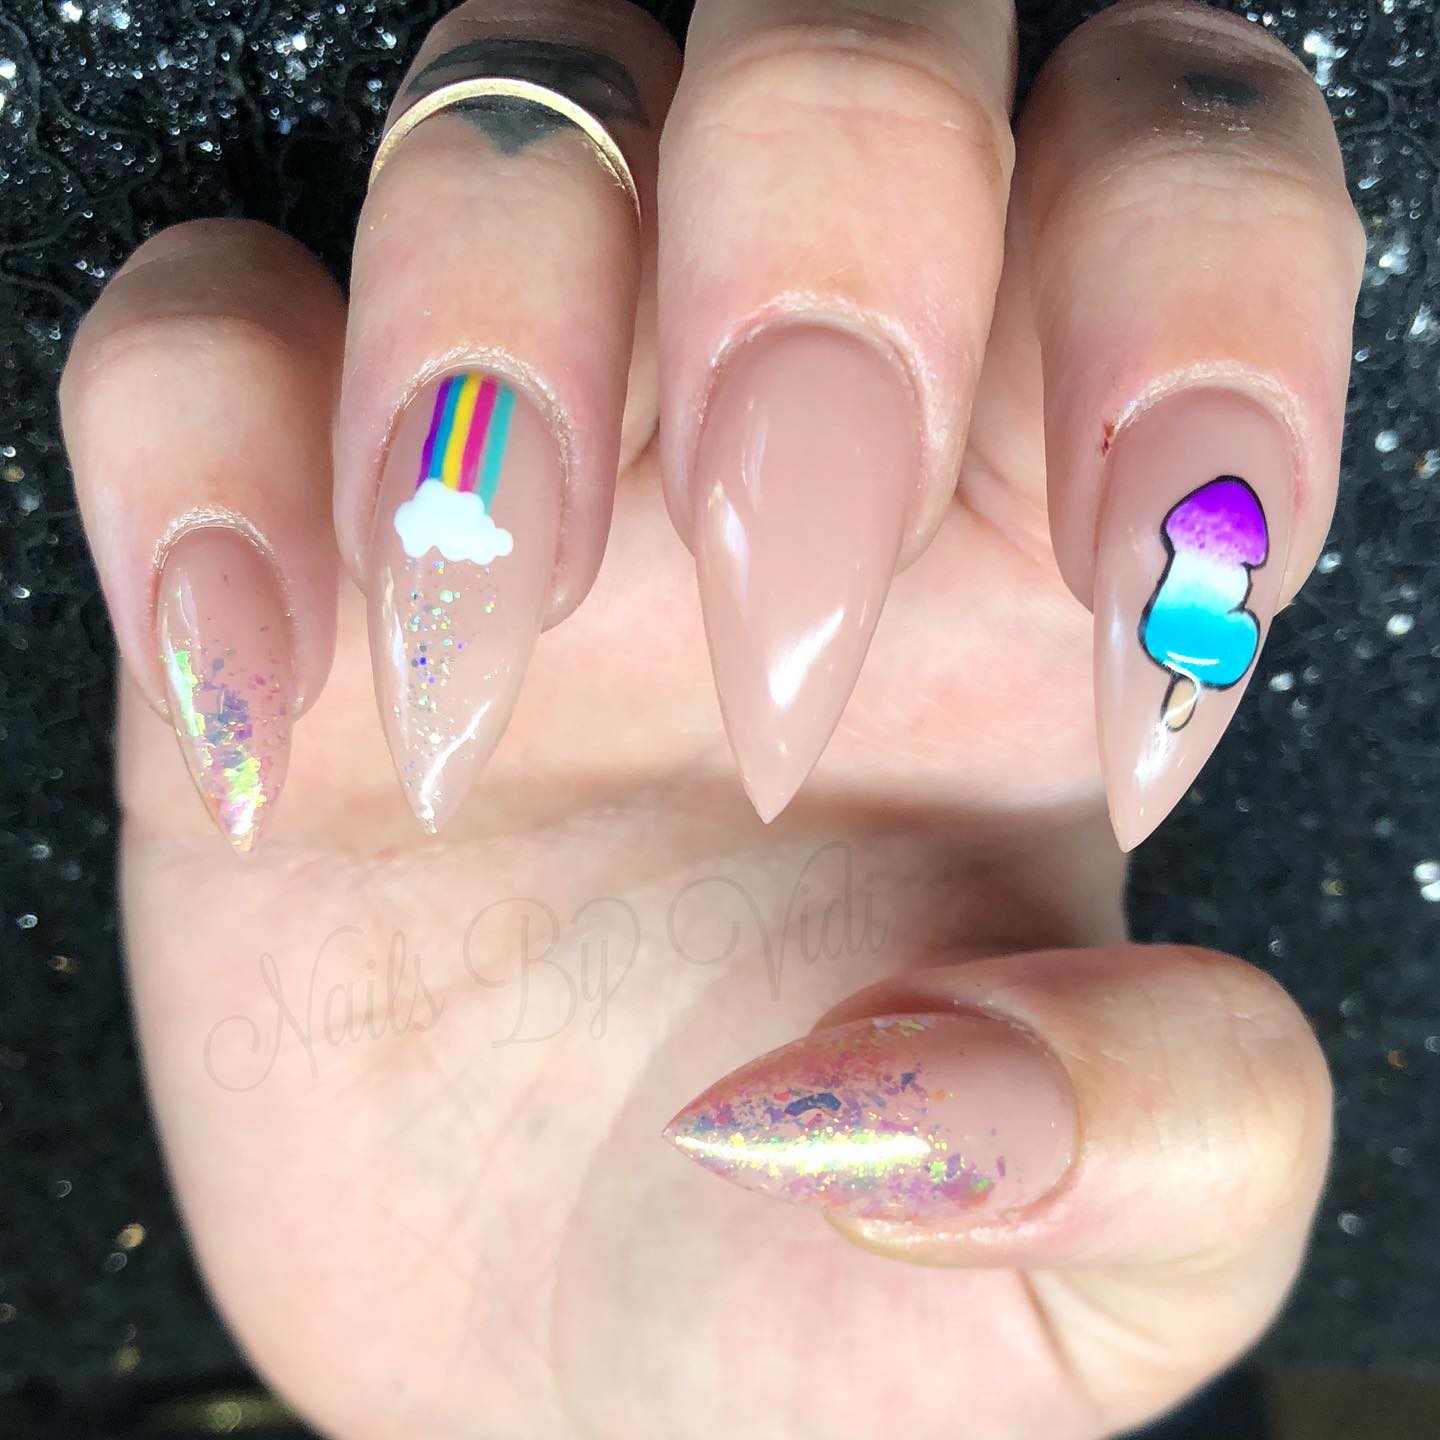 For the Pride month, we have a nice nail idea for you. On your nude base, some glitters look amazing with a rainbow and a penis ice cream.